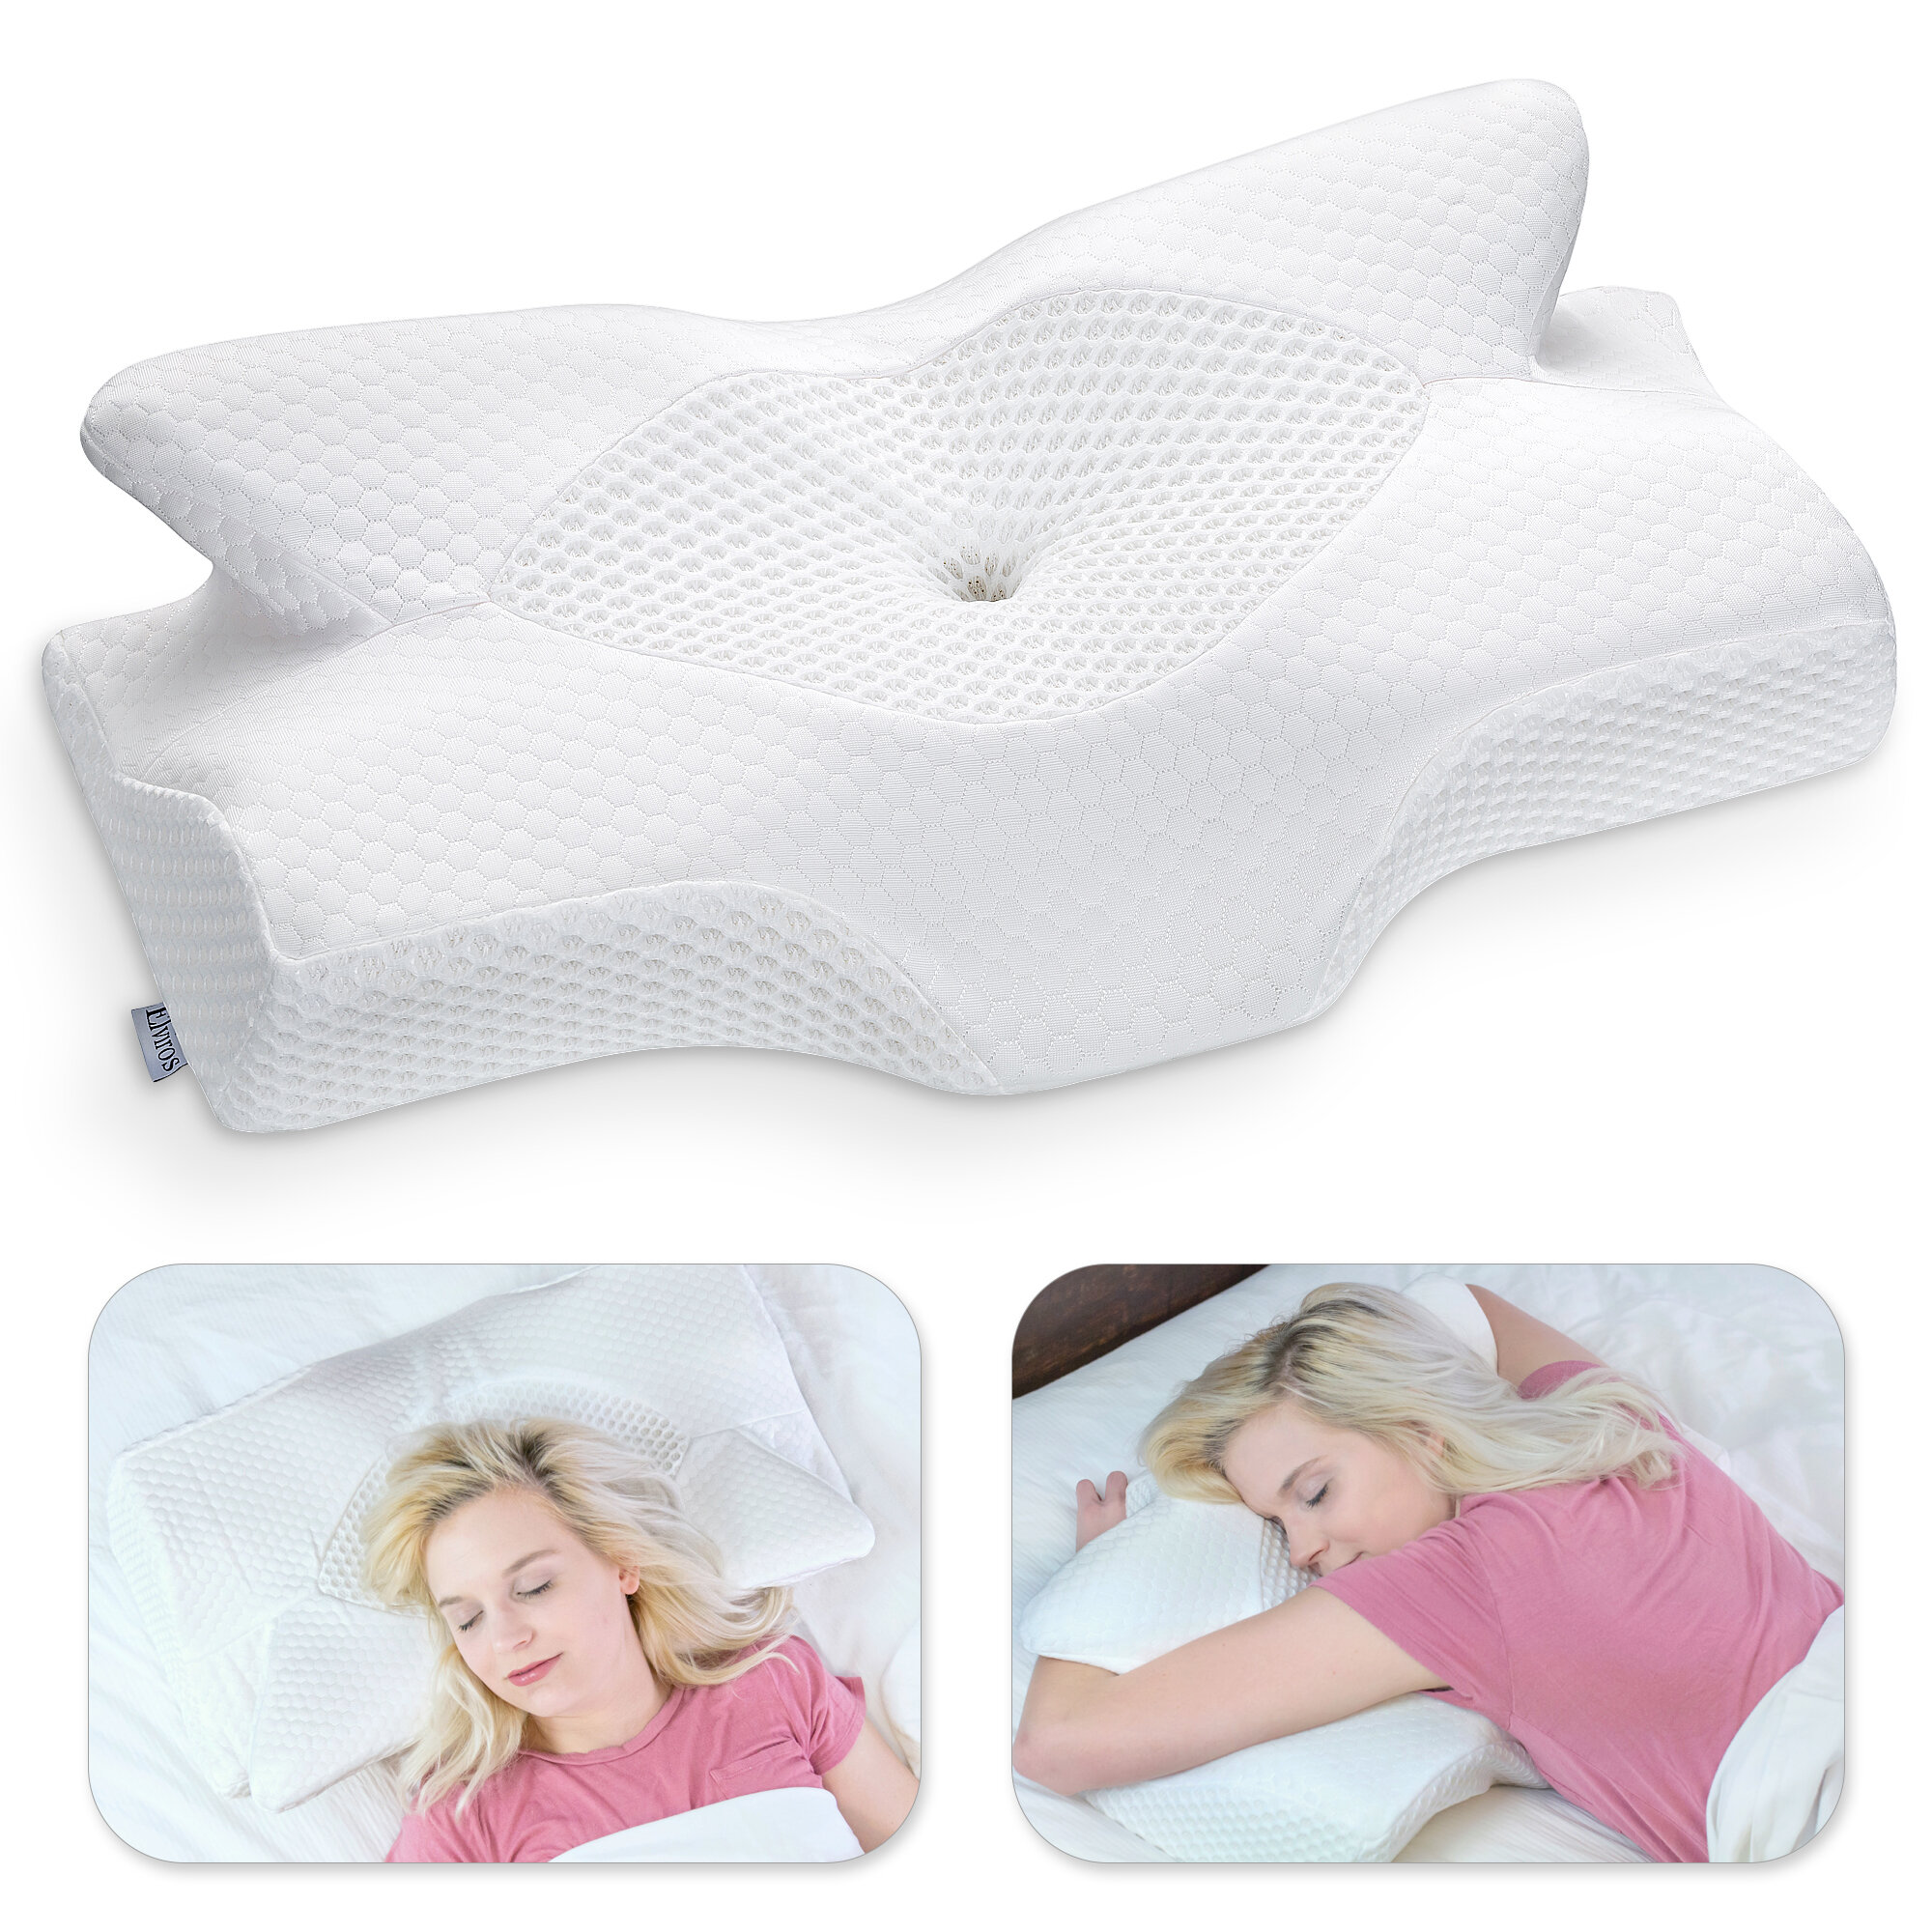 Pillow Foam Sleep Pillow Contour Cervical Orthopedic Protect Neck Support Breath 